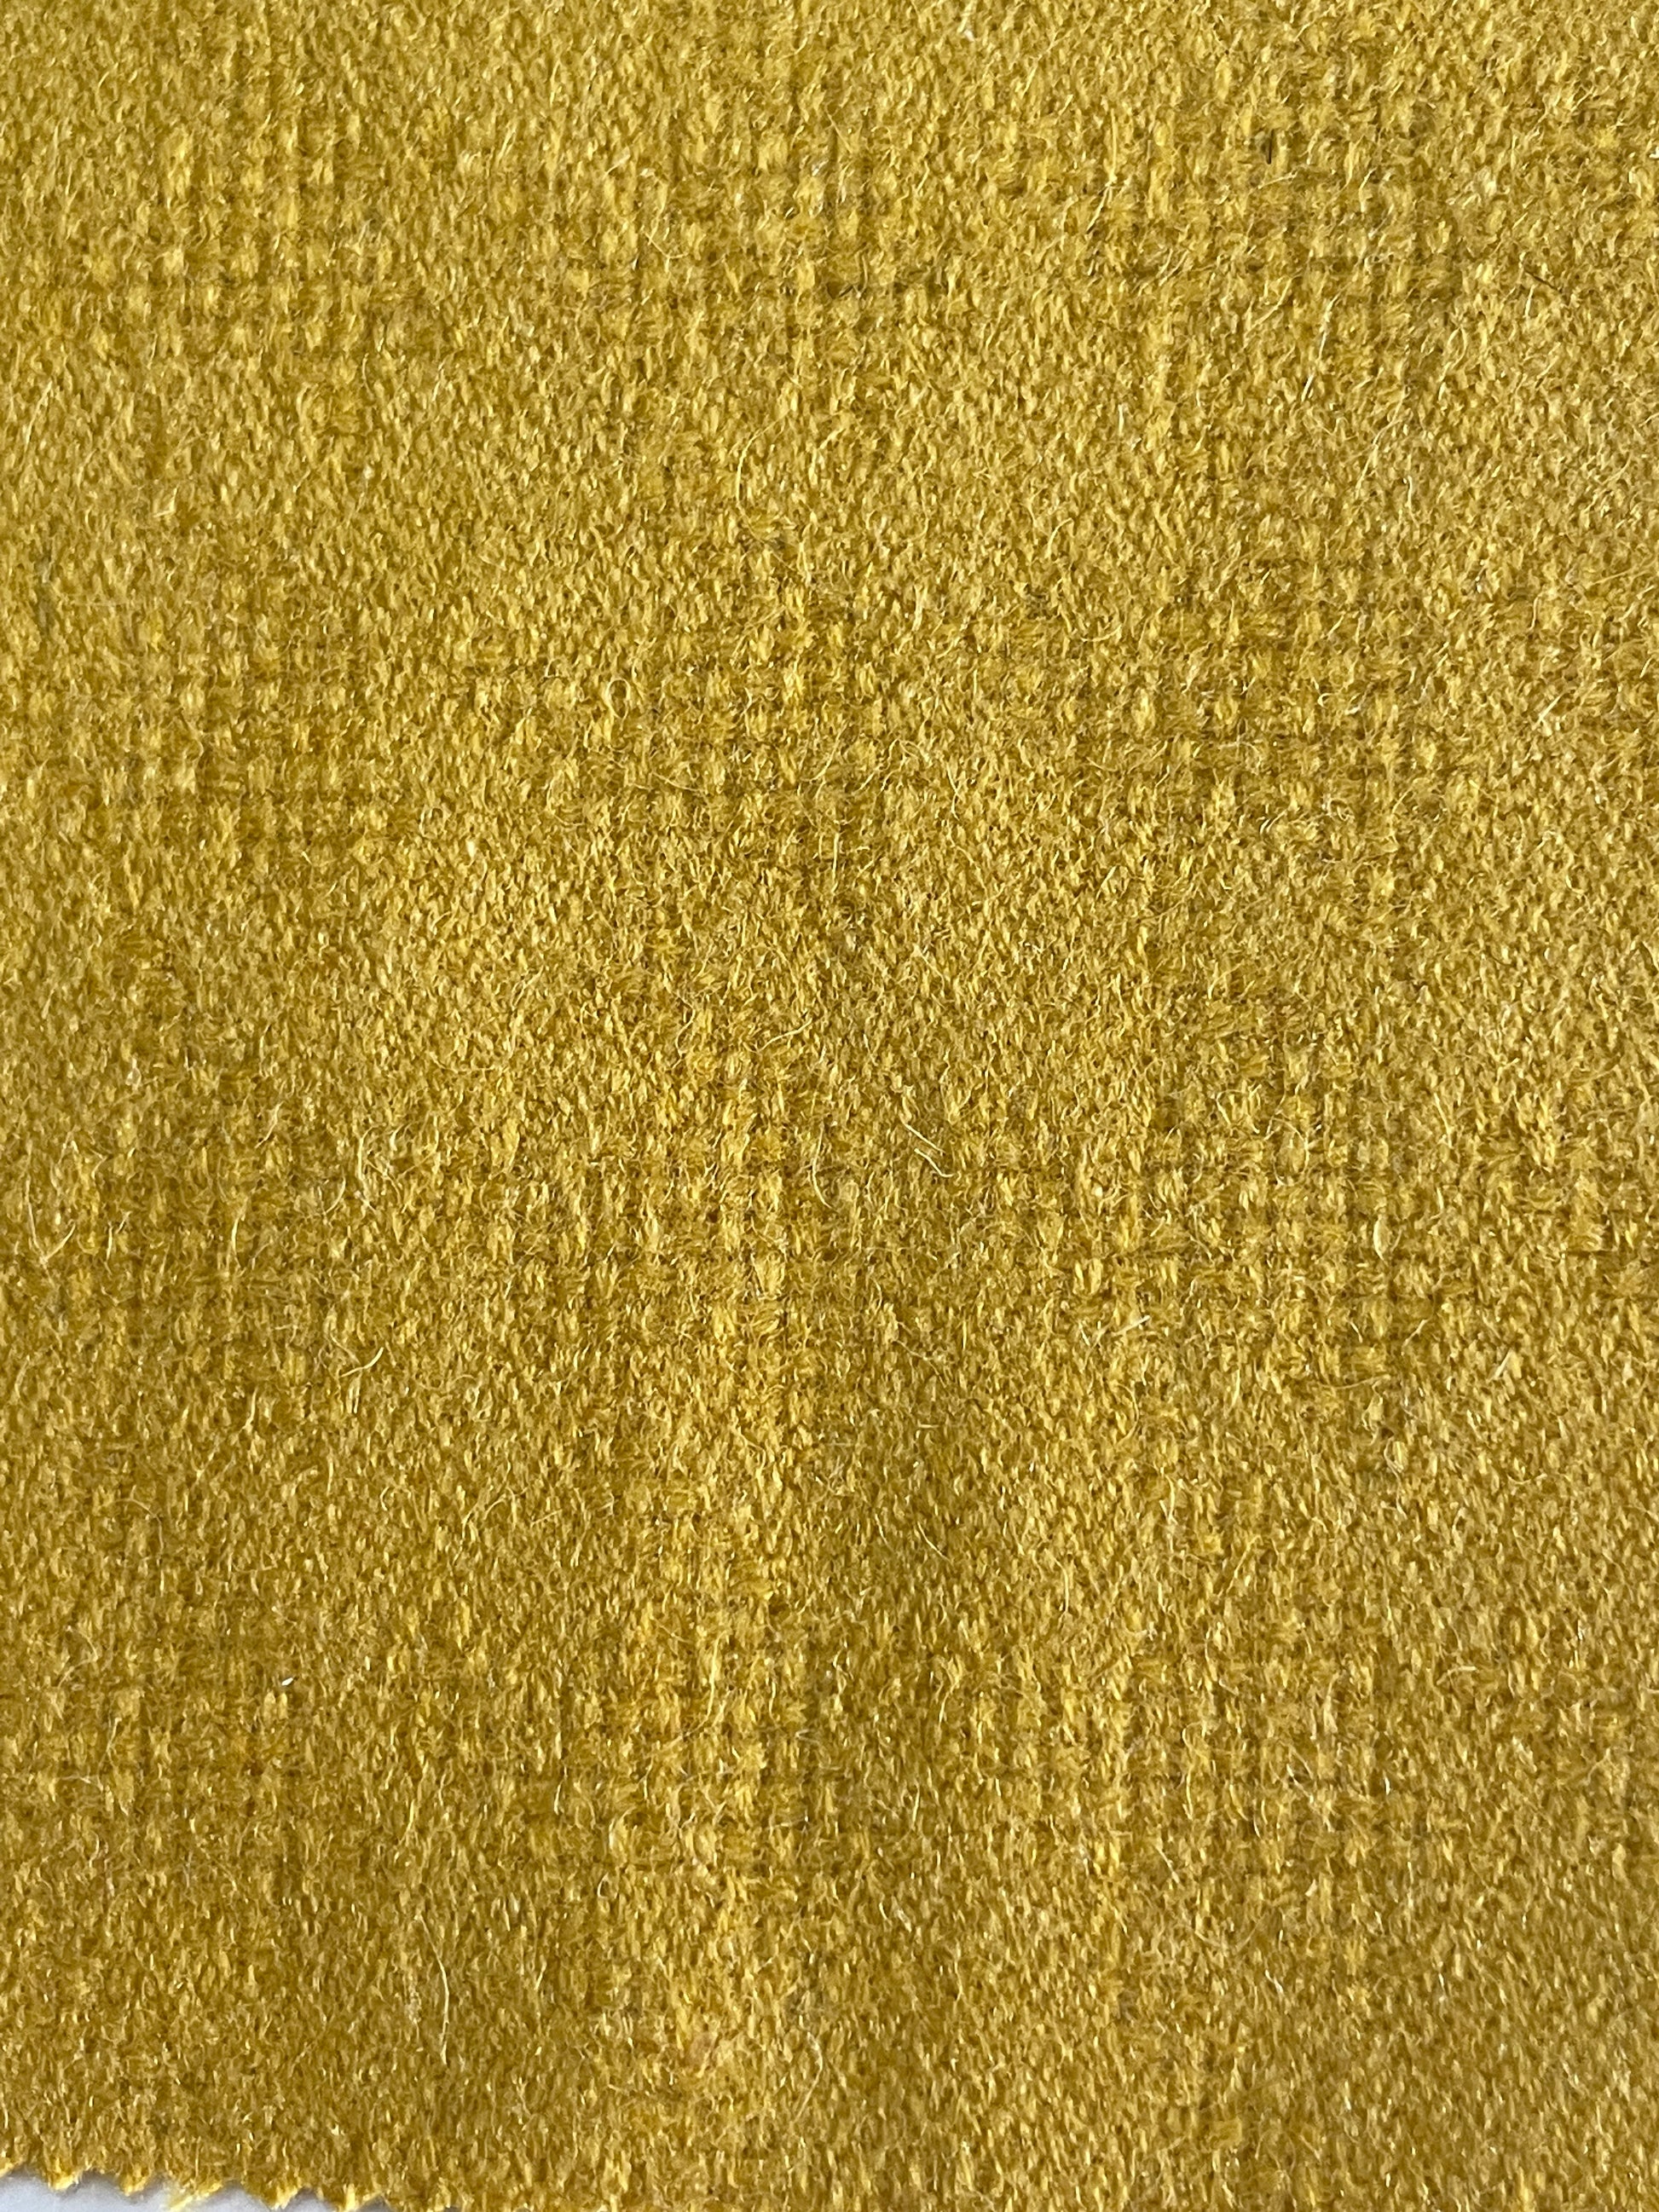 New Arrival Wool Polyester Blended Boucle/Tweed On Sale - Natasha Fabric